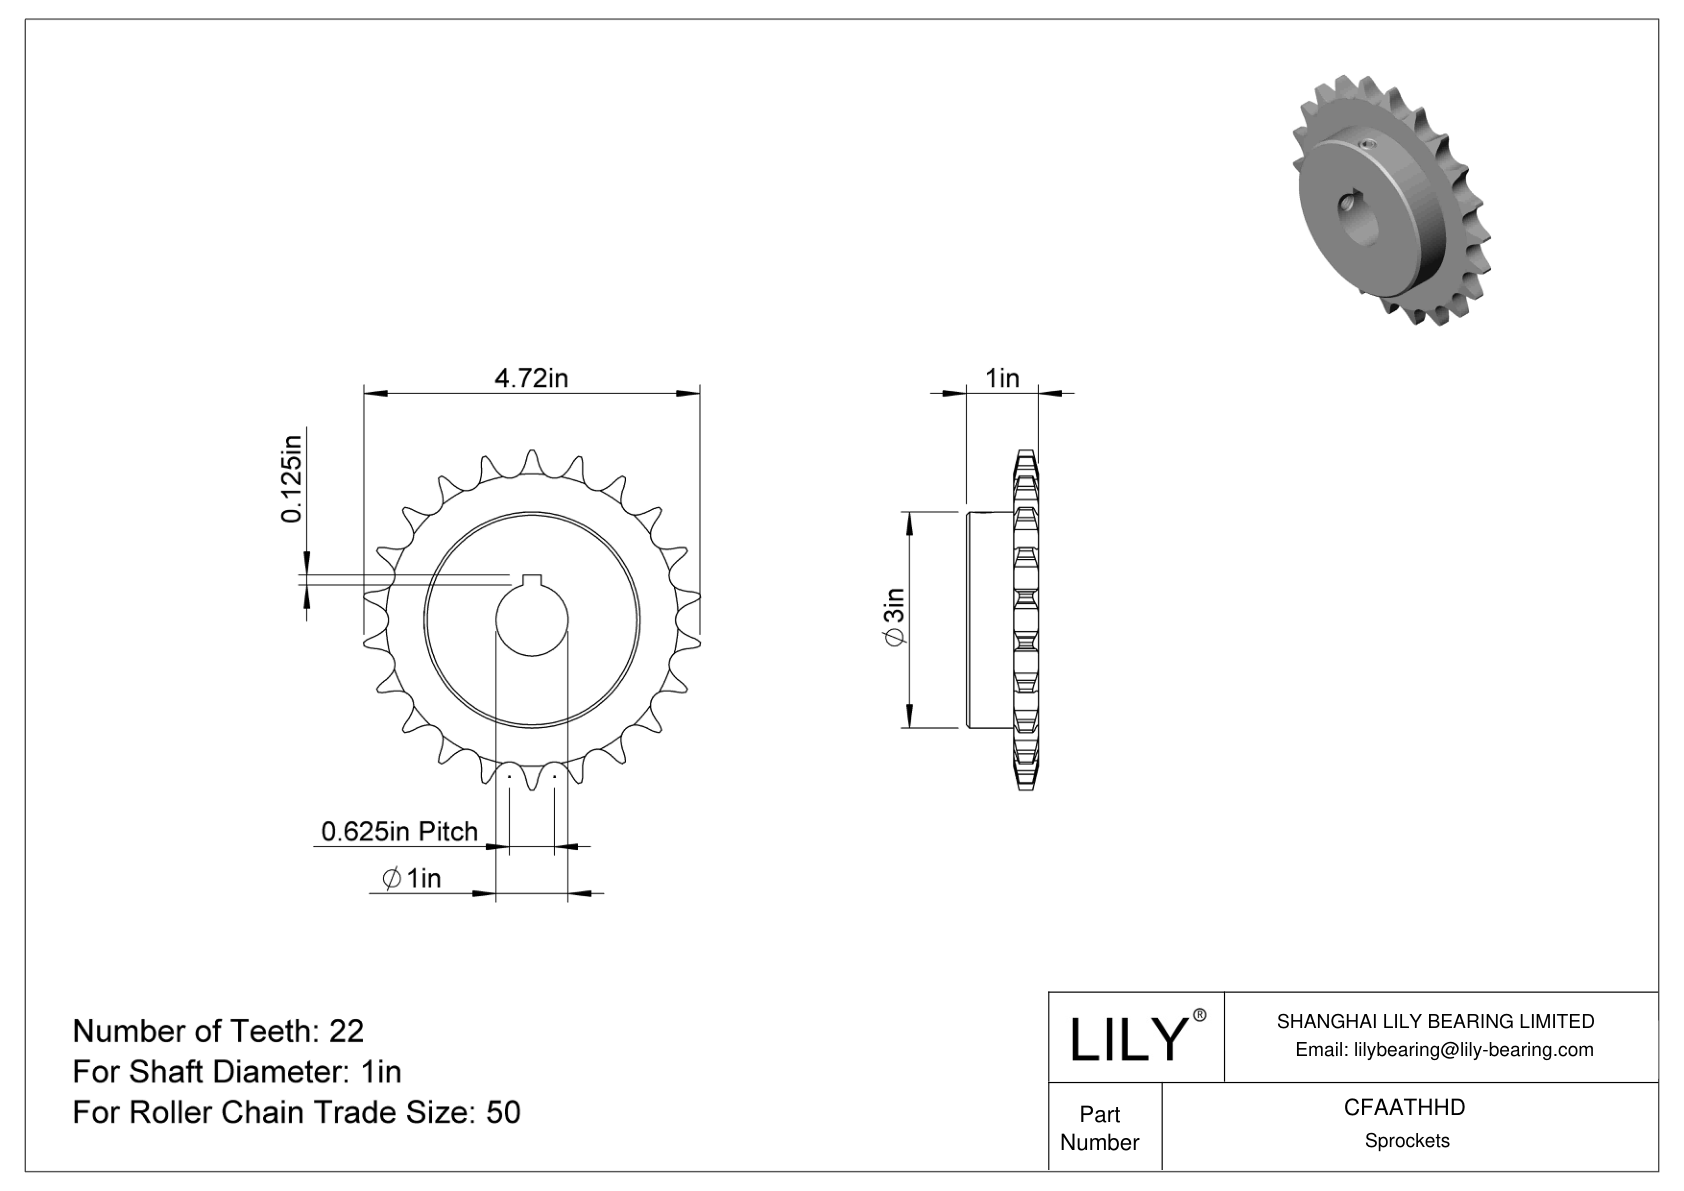 CFAATHHD Wear-Resistant Sprockets for ANSI Roller Chain cad drawing